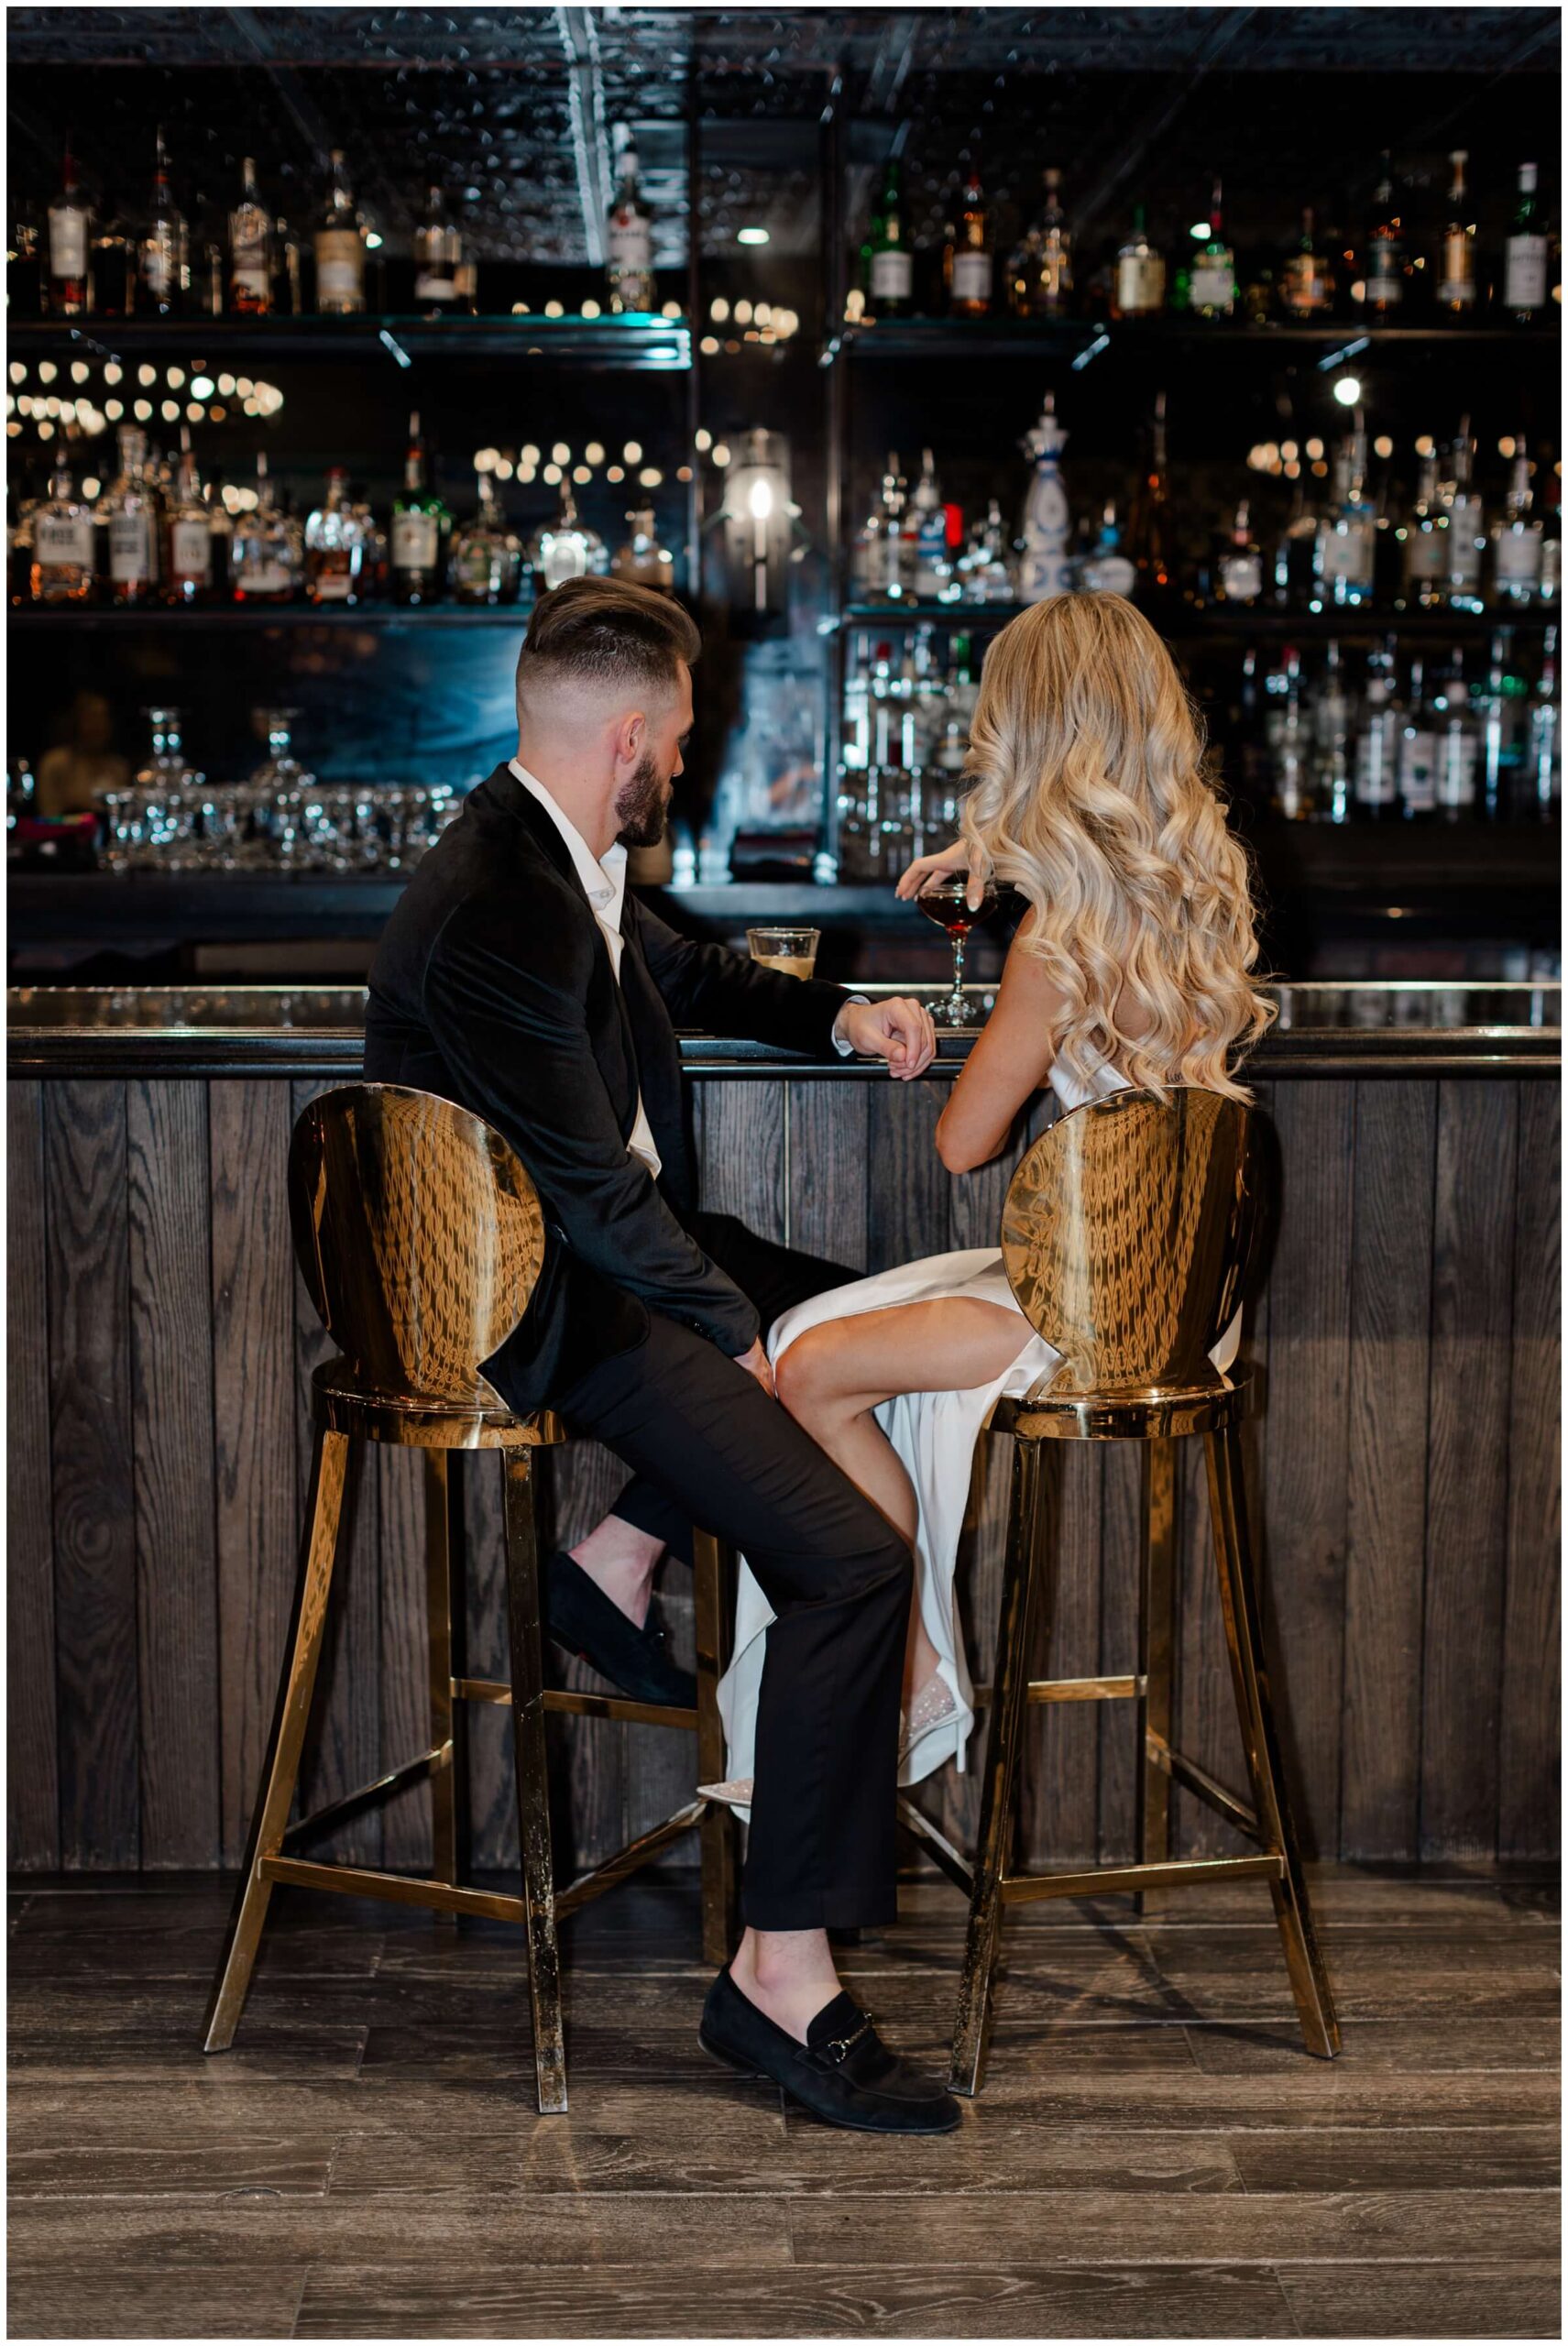 Classy engagement photos at a bar in houston